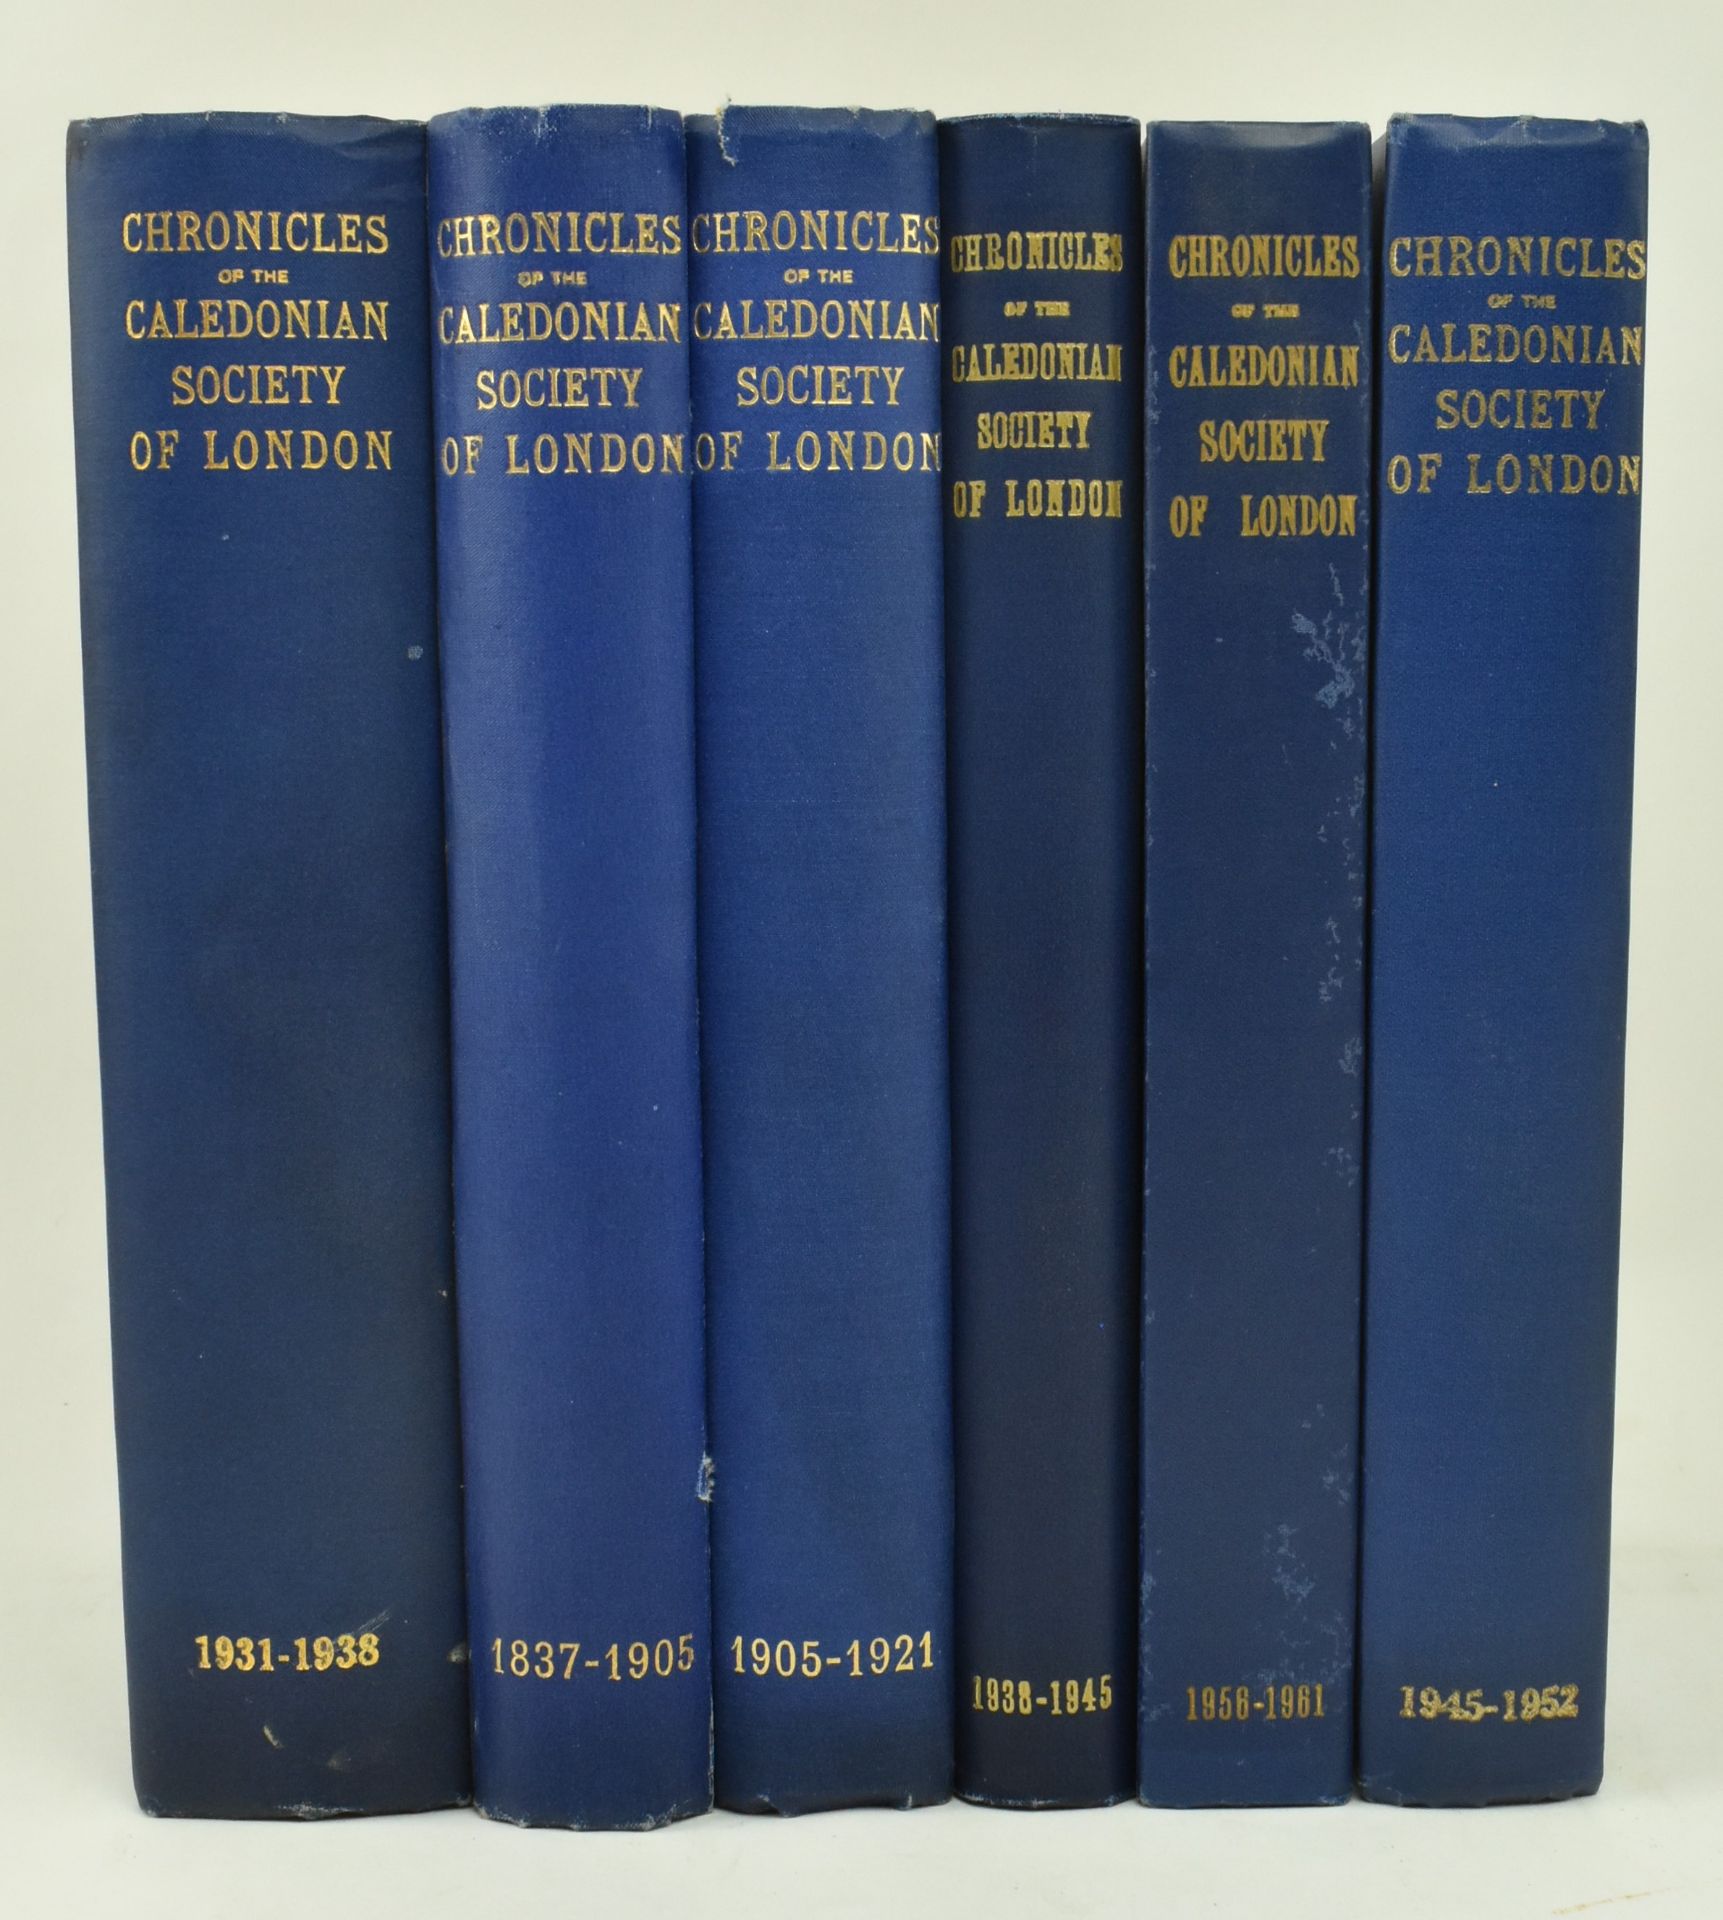 THE CHRONICLES OF THE CALEDONIAN SOCIETY, LONDON. 6 VOLUMES